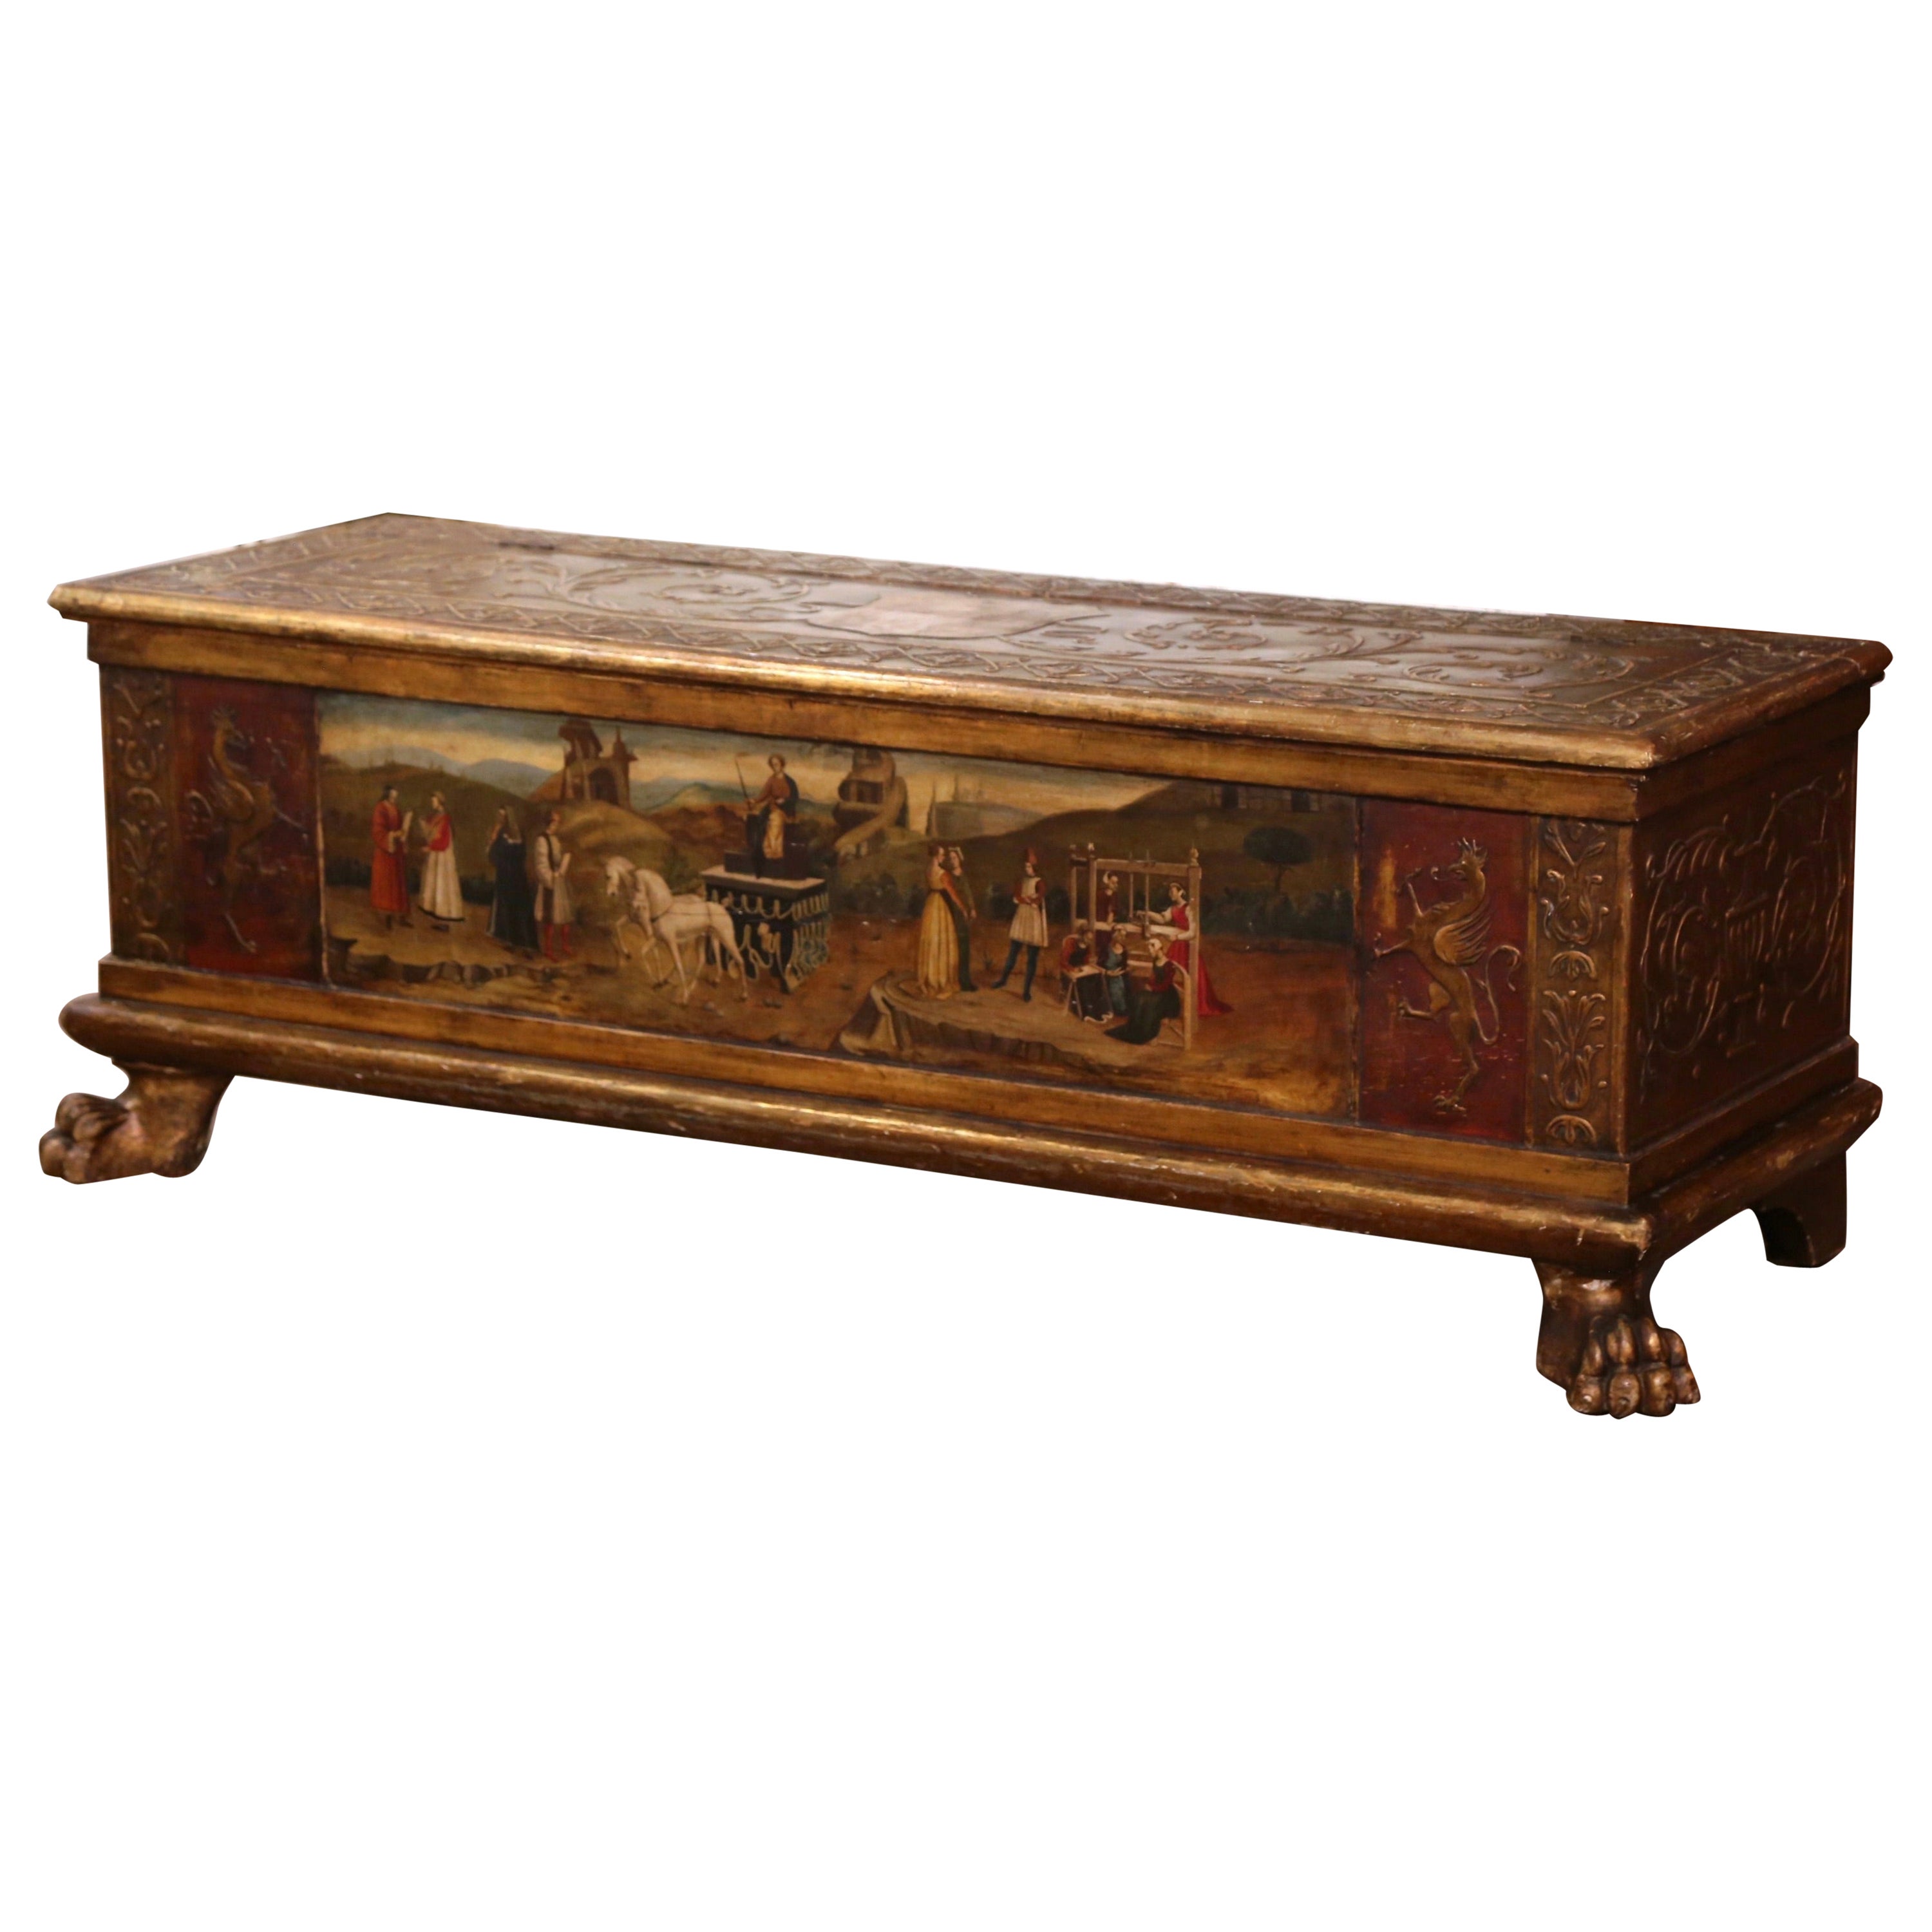 Mid-18th Century Italian Carved Giltwood and Polychrome Painted Cassone Trunk For Sale